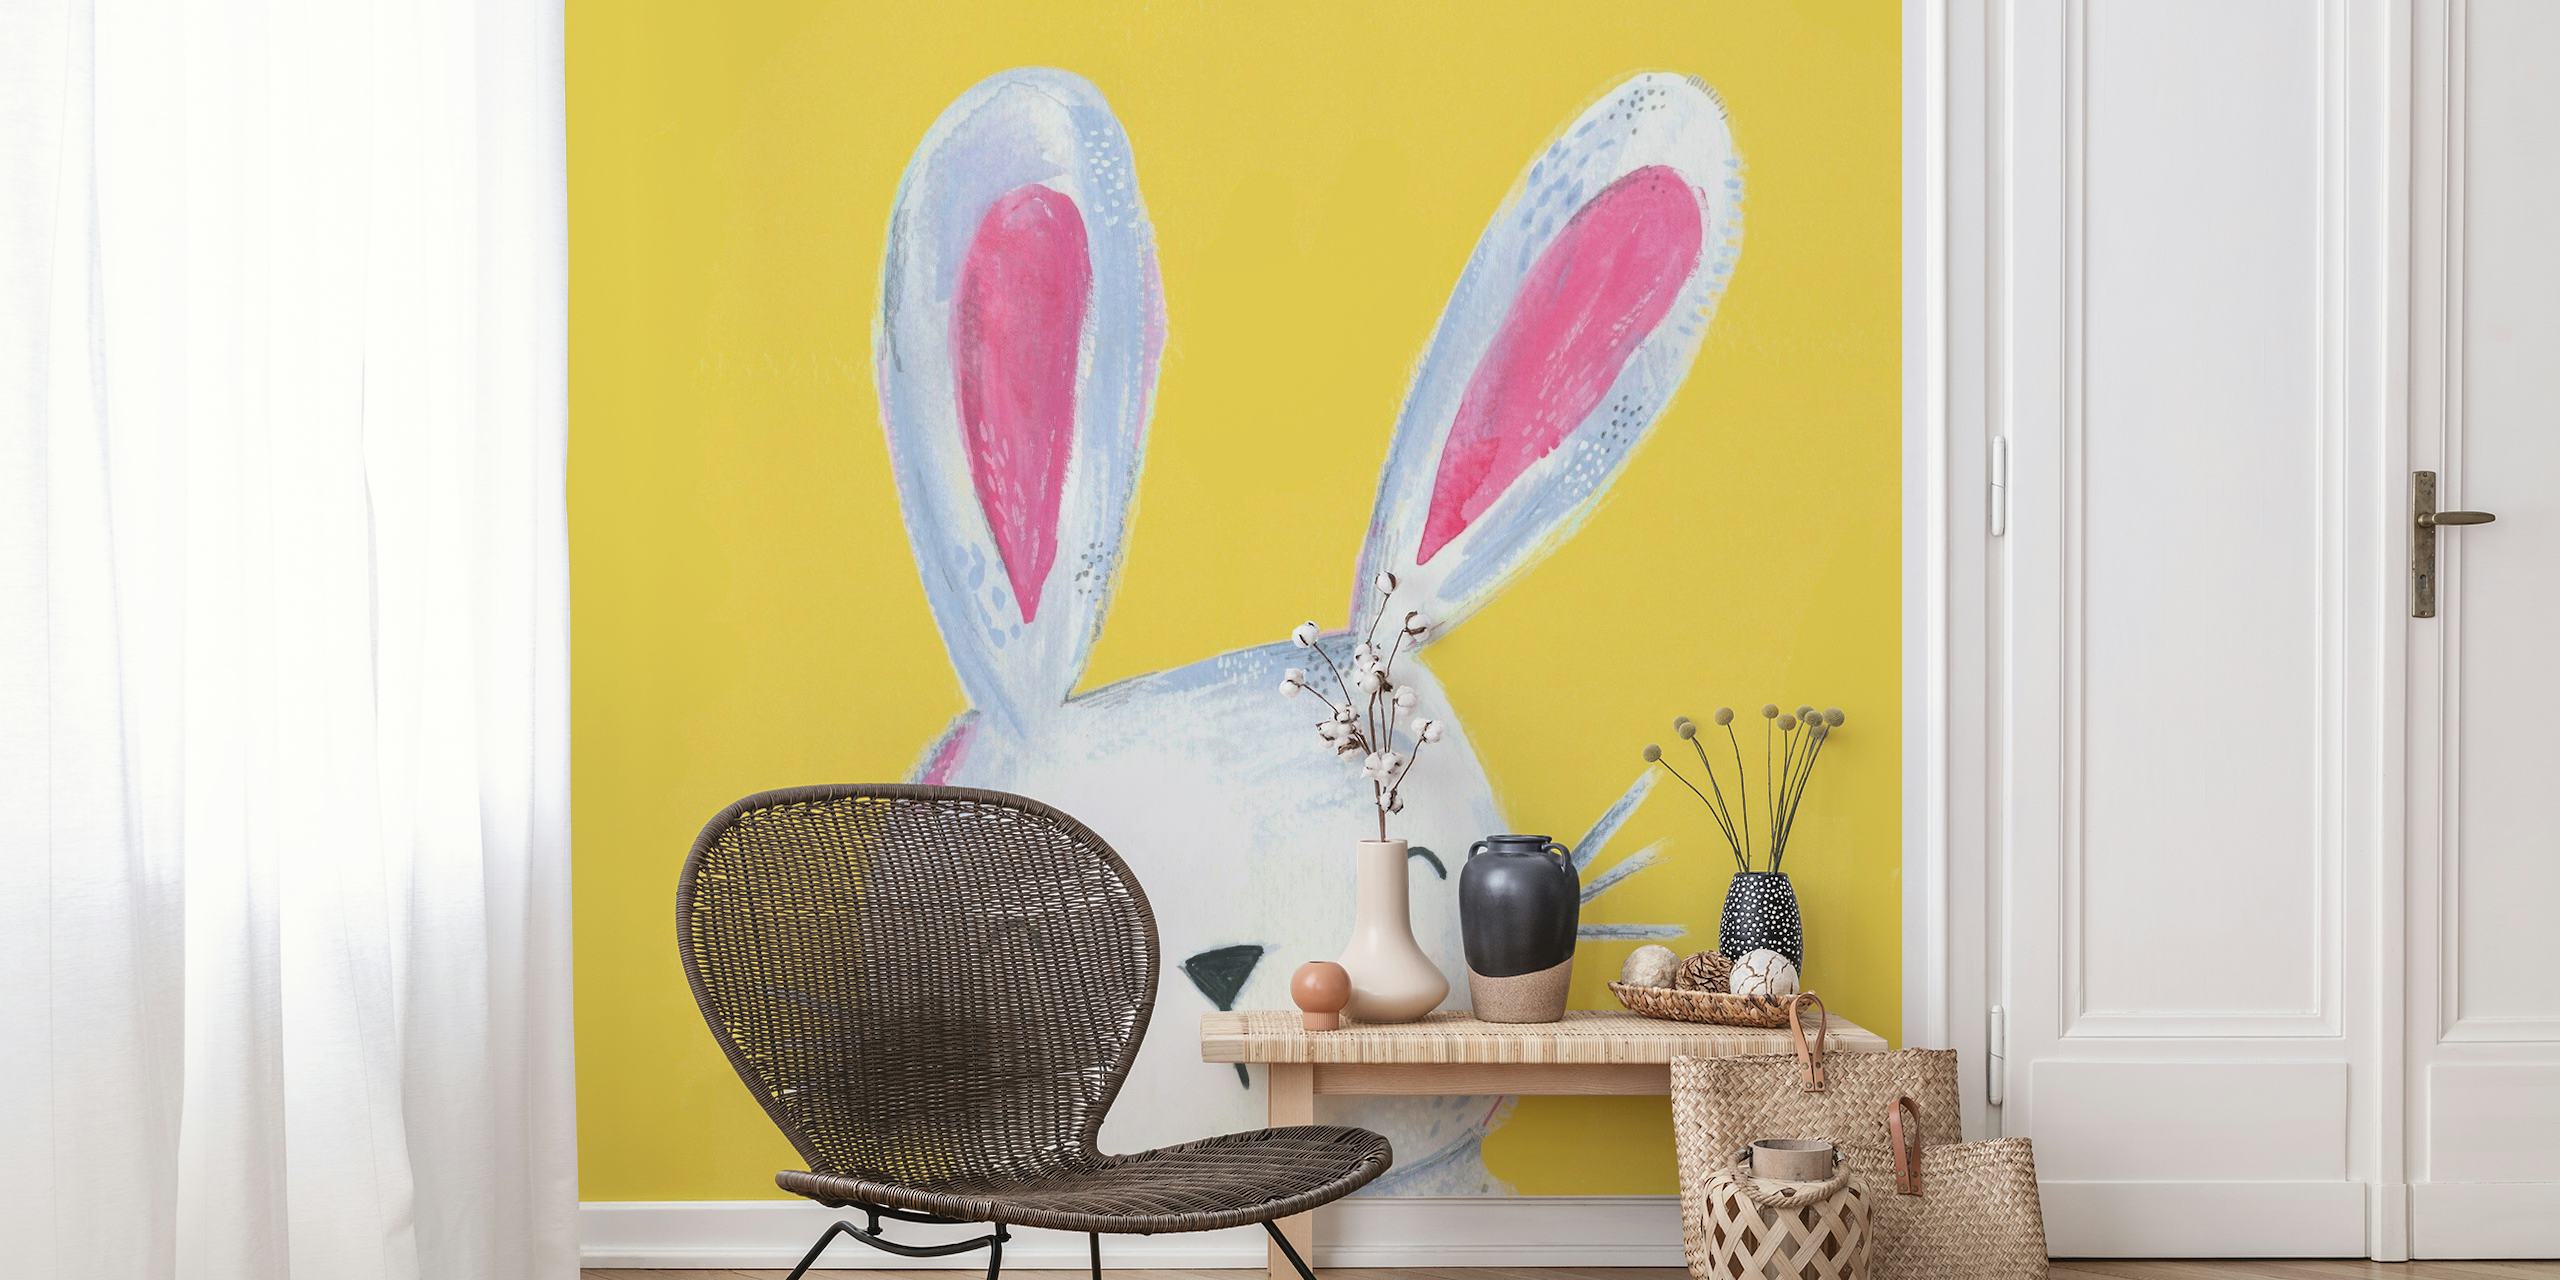 Painted bunny on yellow wallpaper